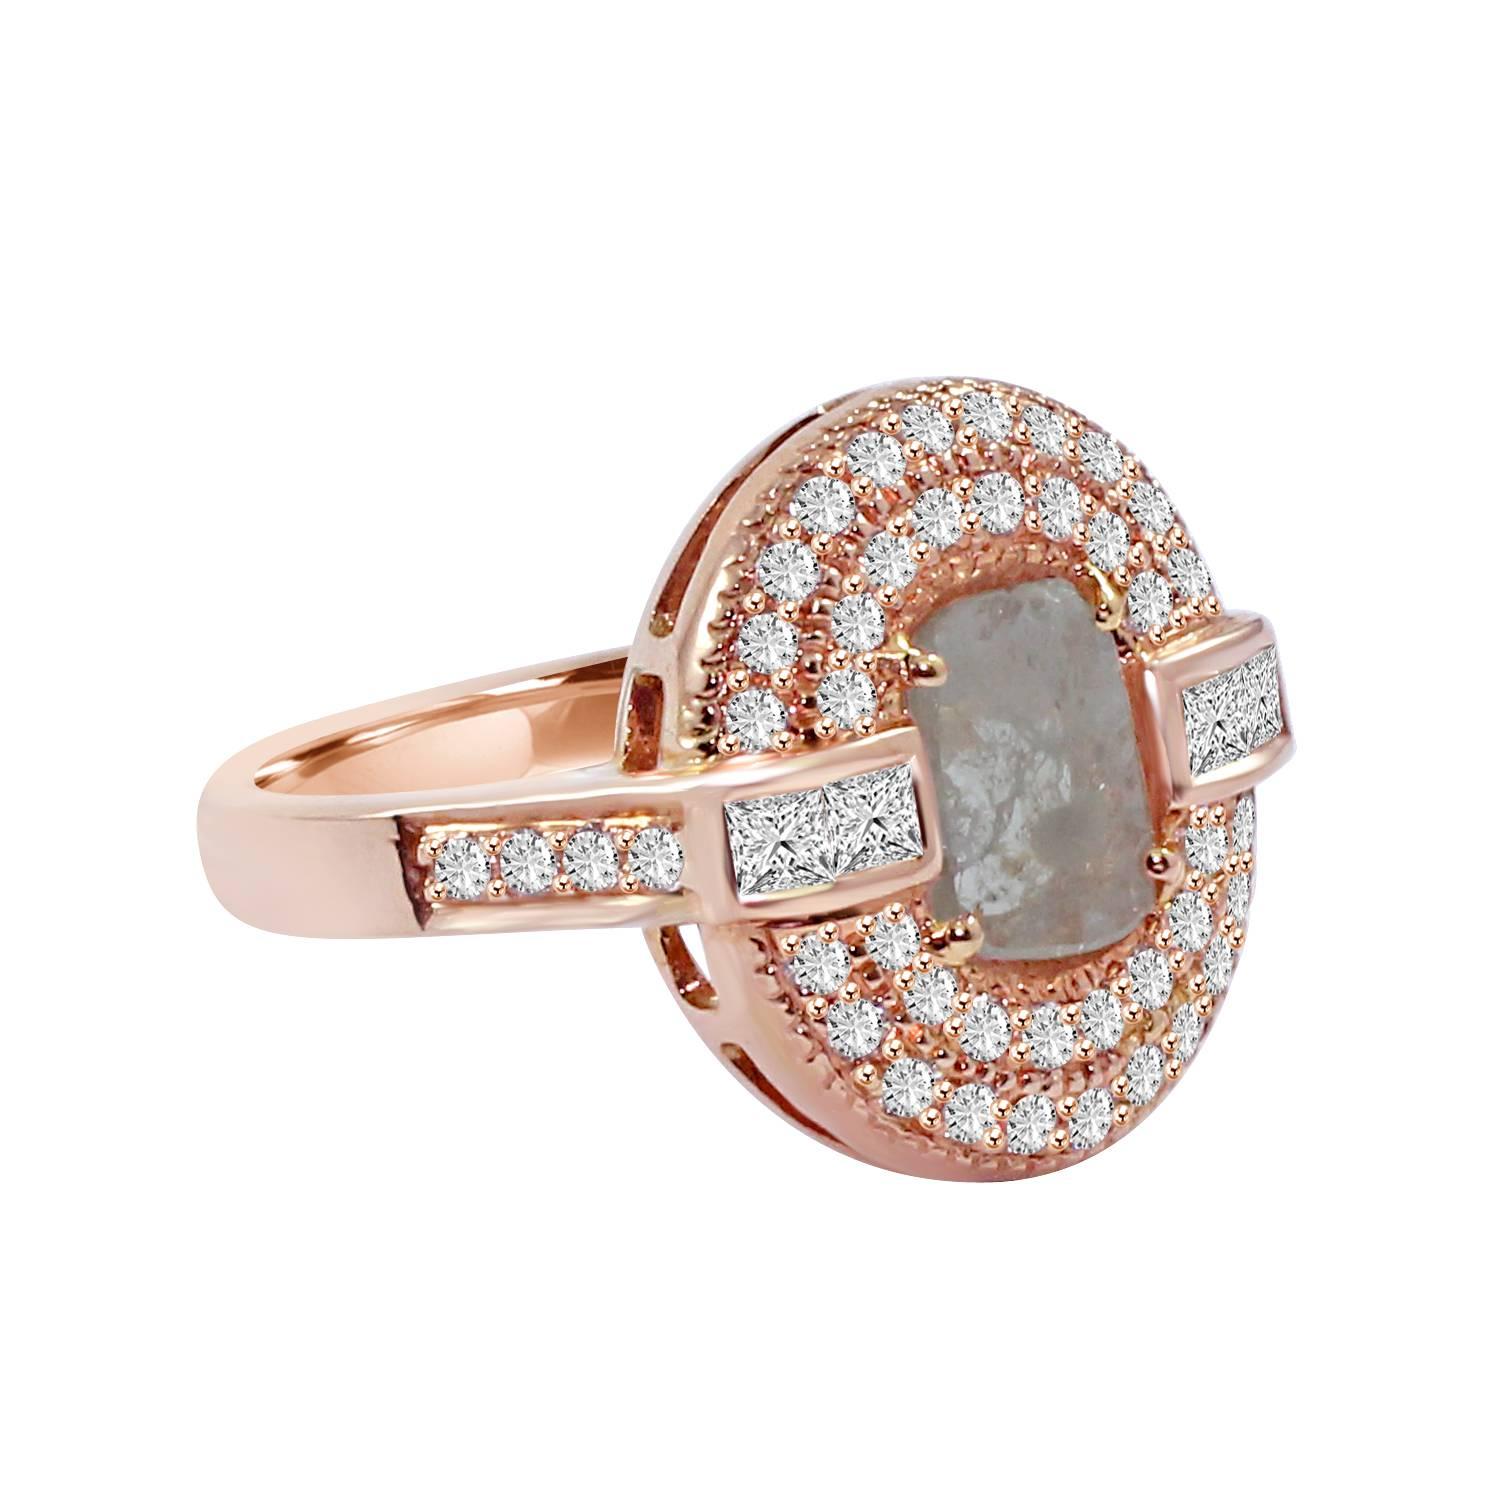 Slice Diamond Ring accented with Princess cut and Brilliant cut White Diamonds with 1.08cts. total diamond weight set in 18k Rose Gold